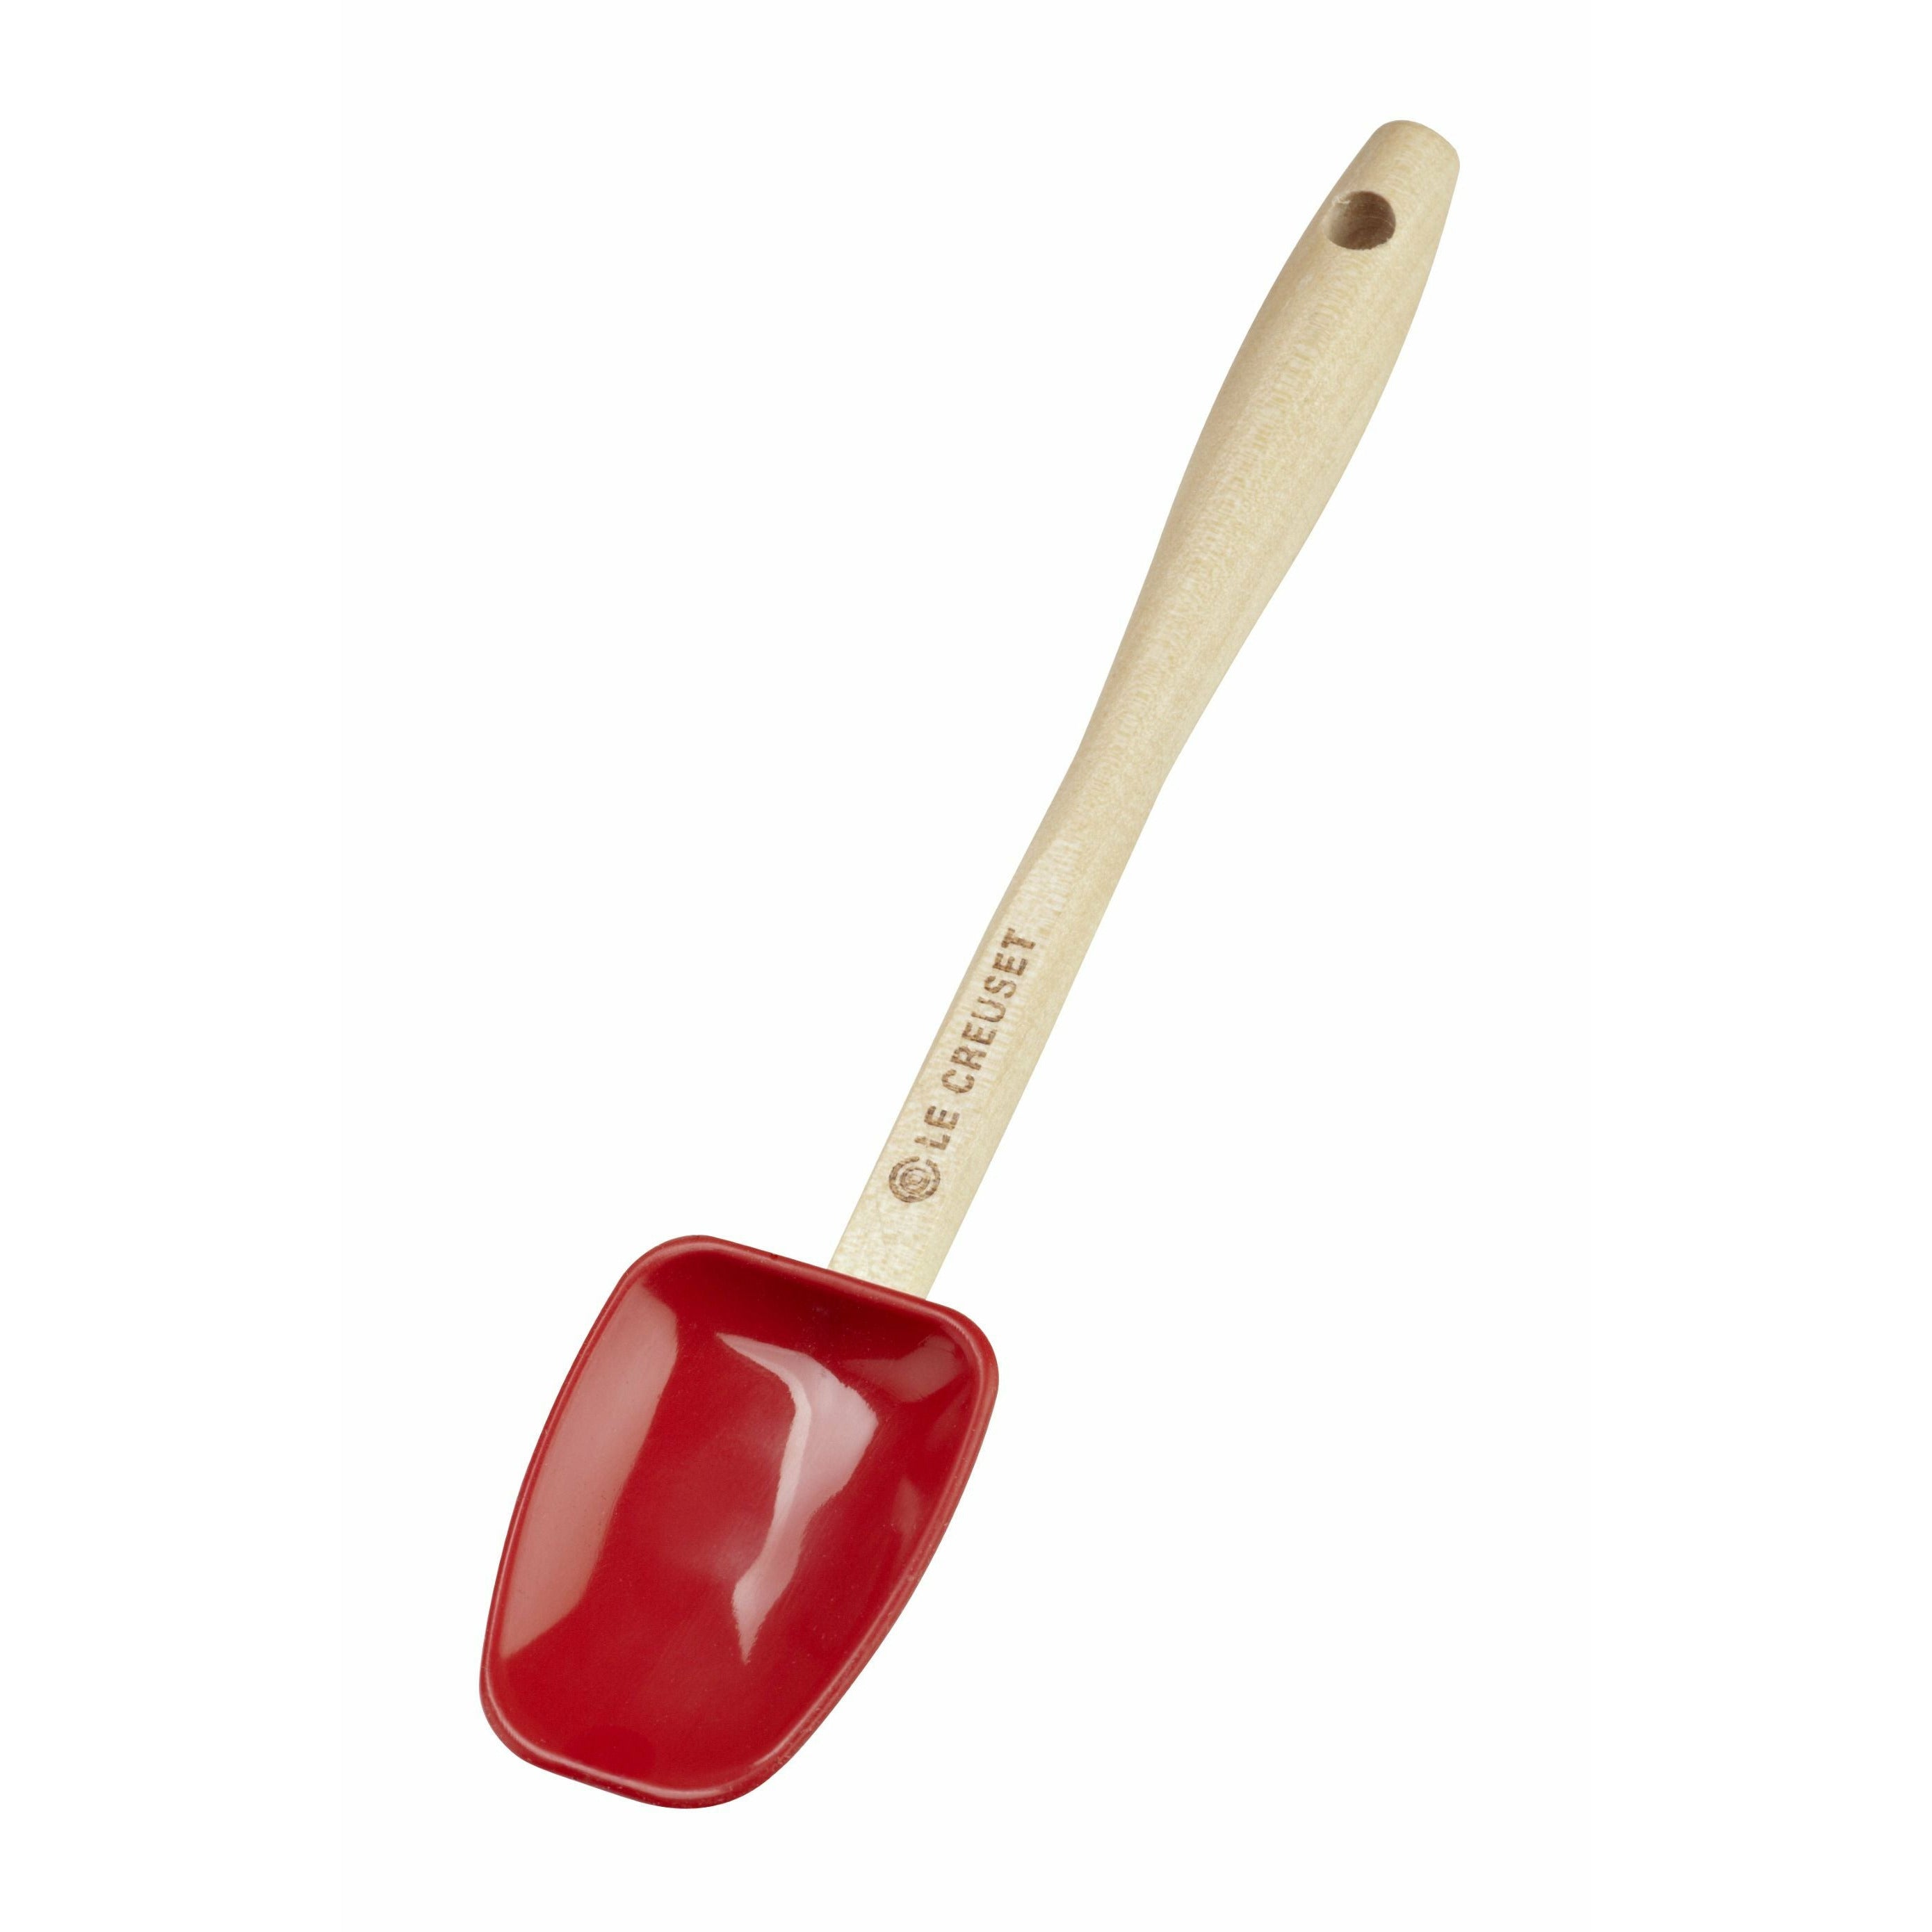 Le Creuset Mini Wooden Spoon Classic, Cherry Red